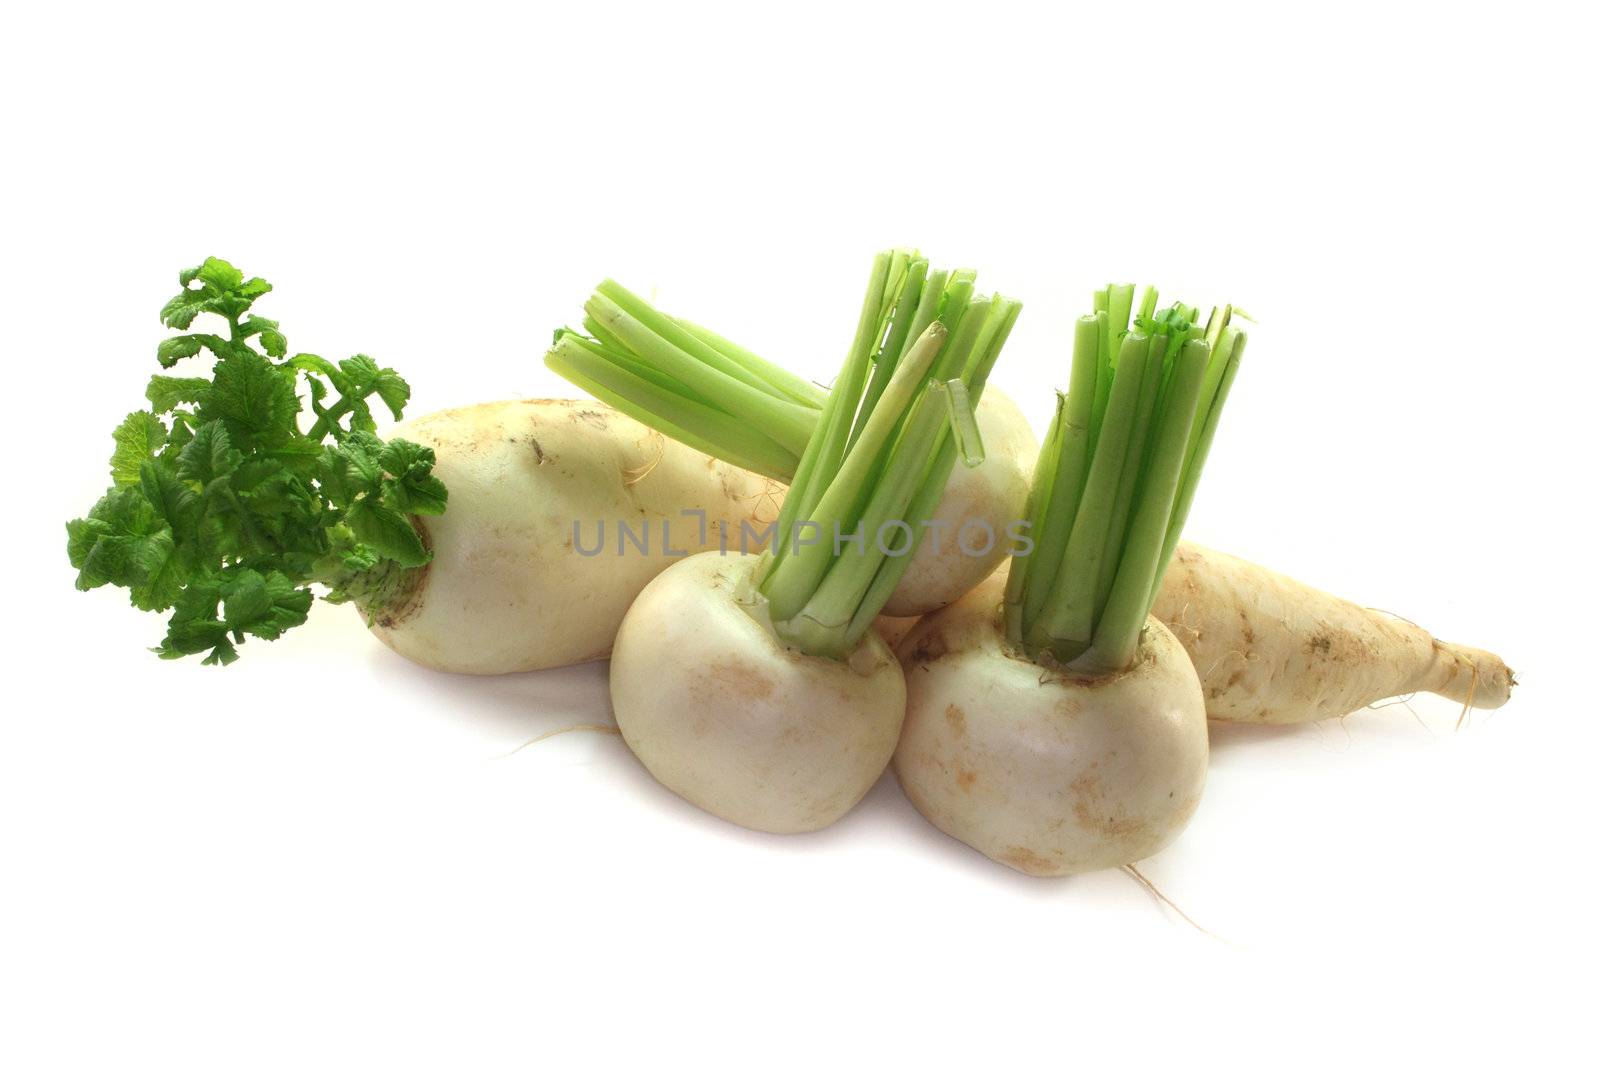 different varieties of radish against a white background